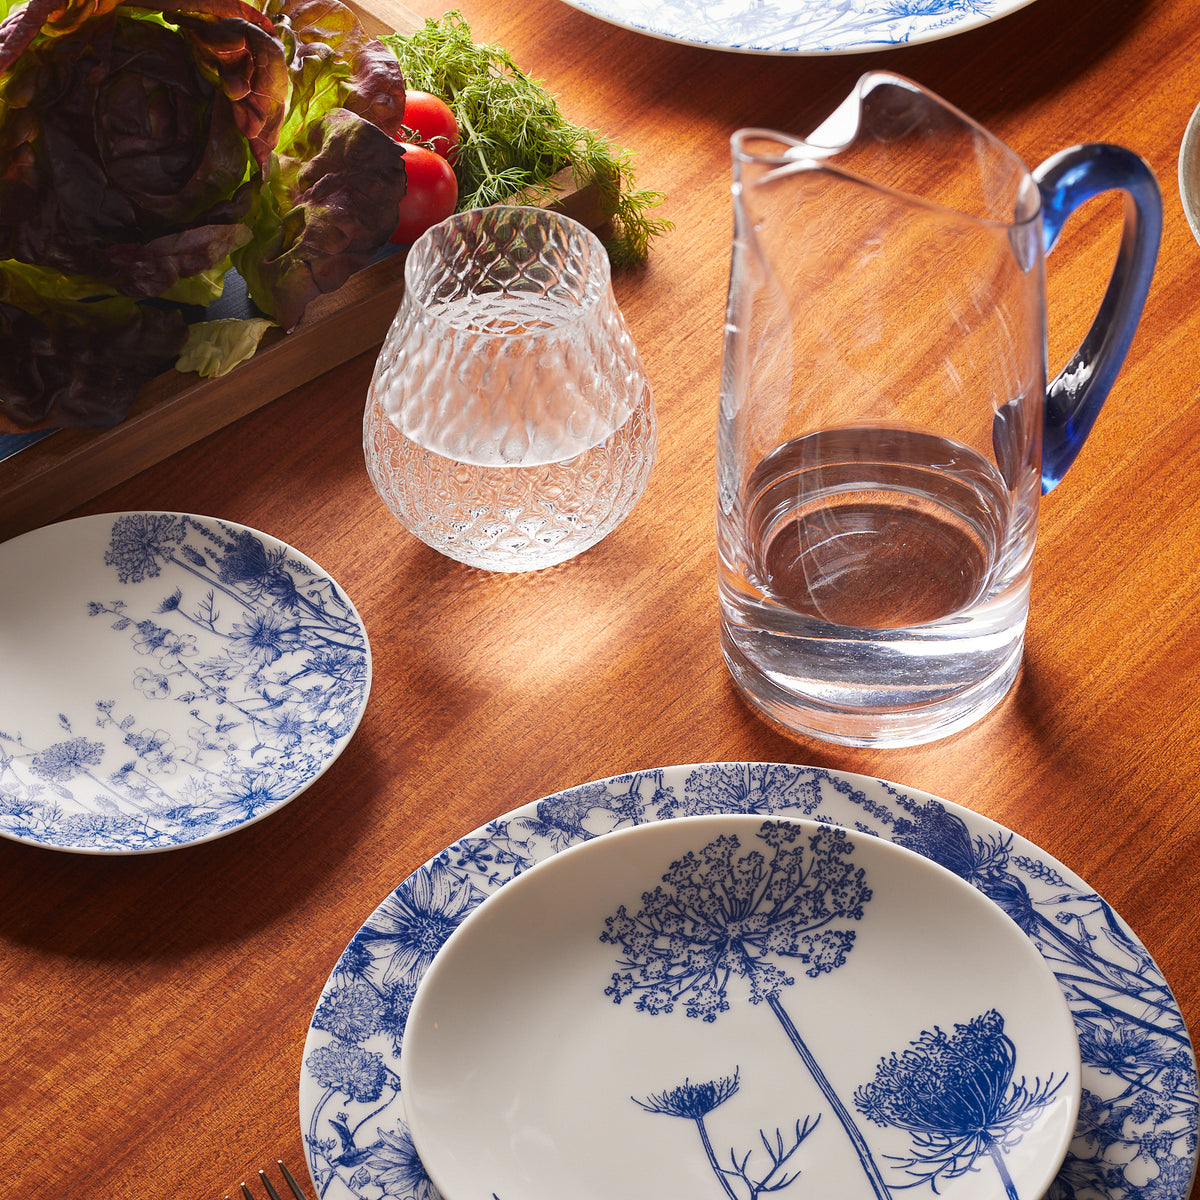 A Summer Blues Coupe Salad Plate from Caskata Artisanal Home, a blue and white plate on a wooden table.